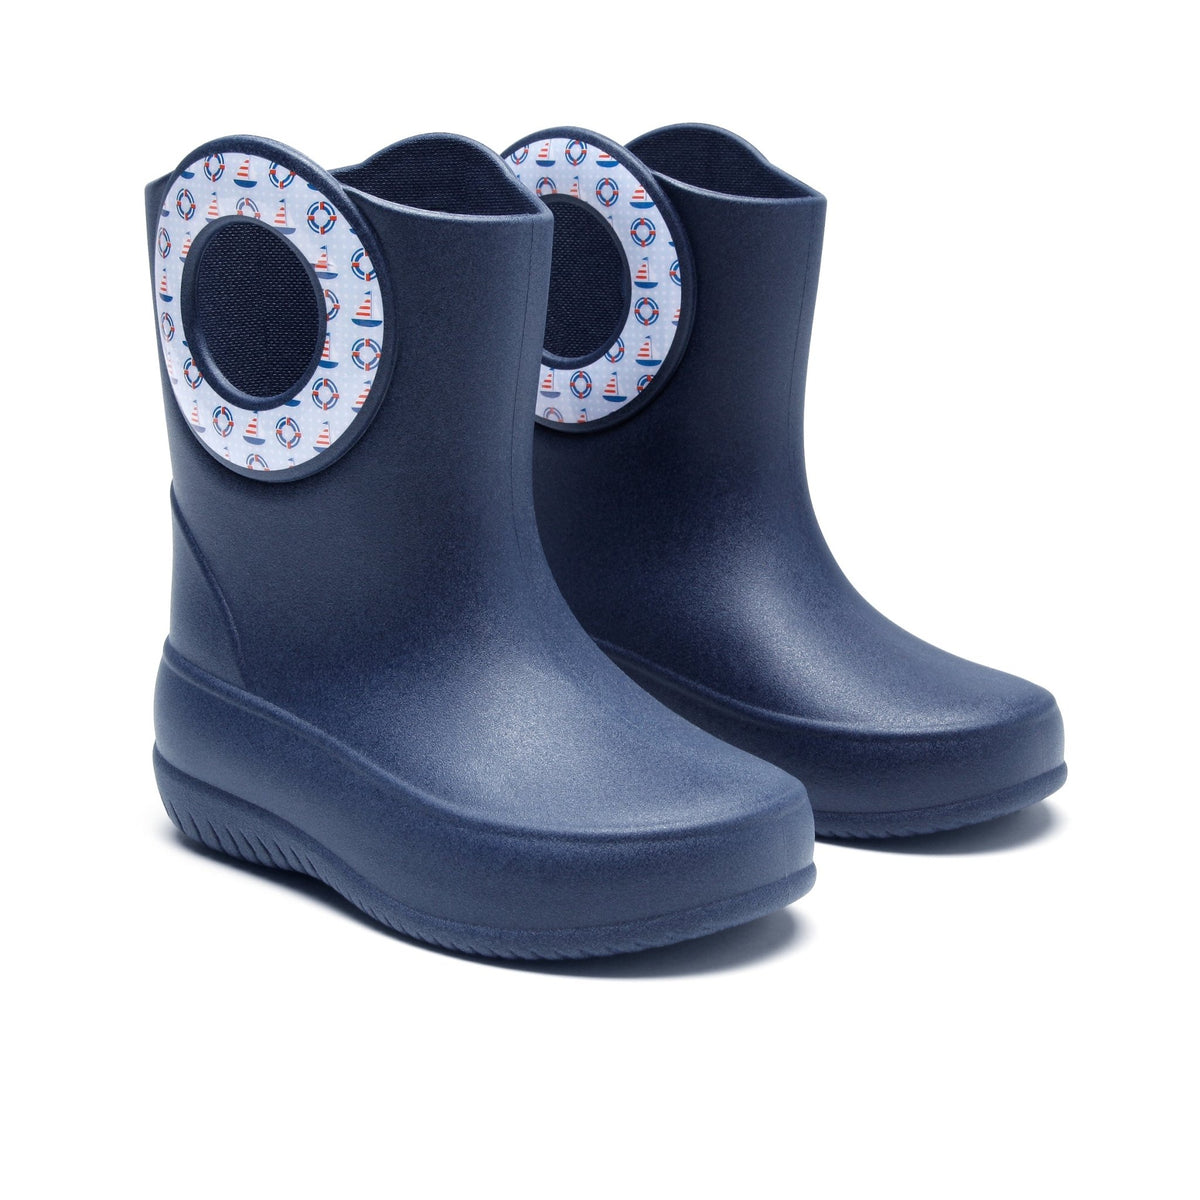 Navy Kendall Toddler Rain Boot | Slip-Resistant | Made in USA